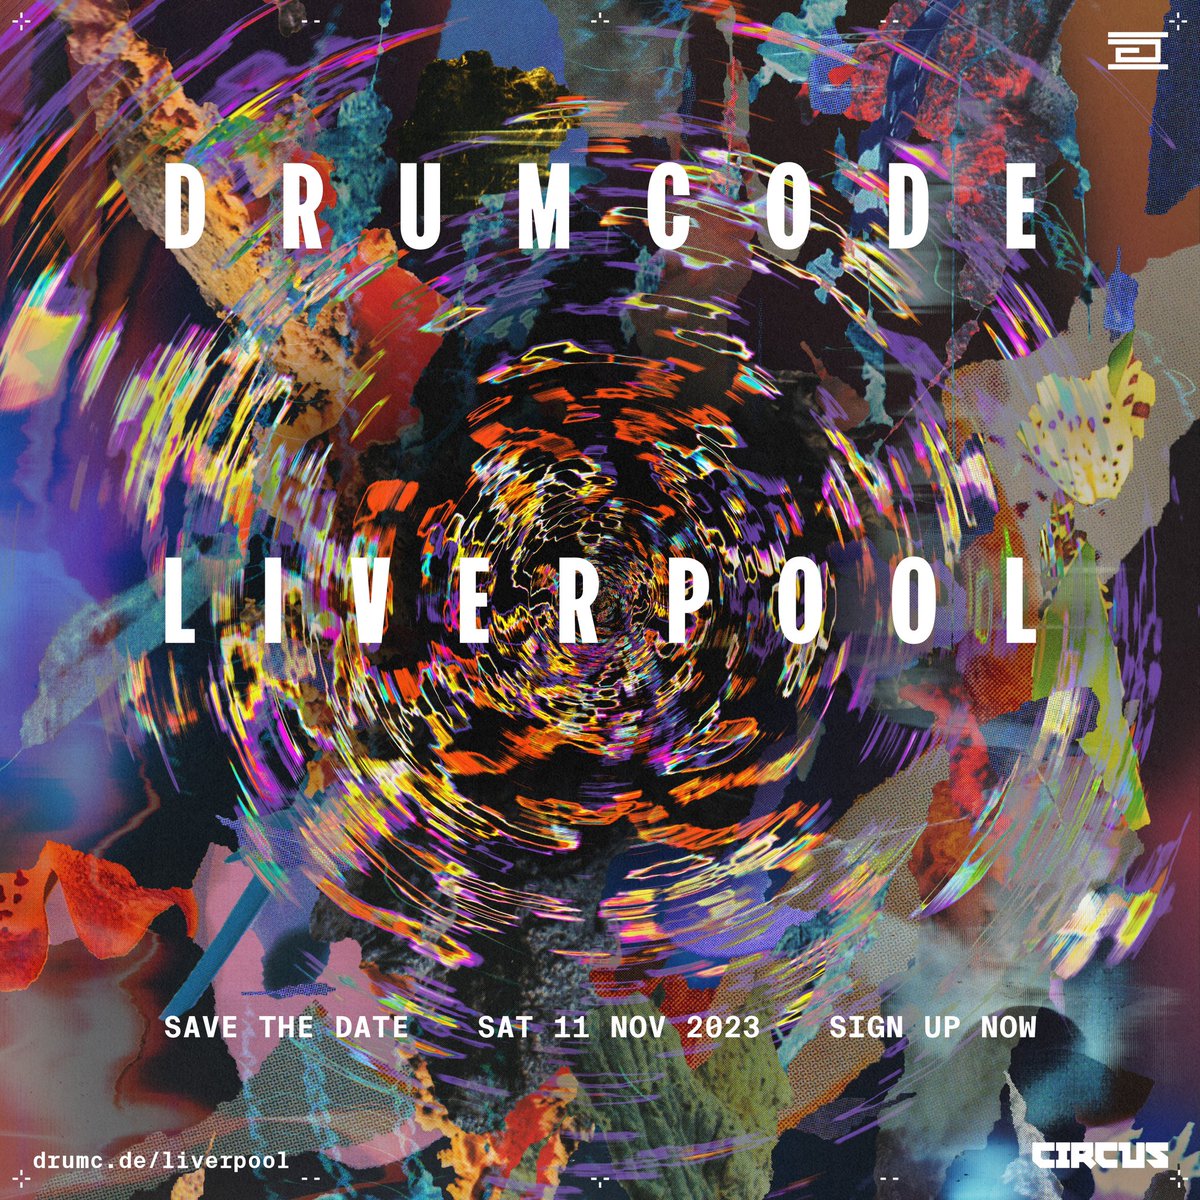 Drumcode Liverpool - Lineup and on sale info dropping early next week 👀 

Hit the link to be first in line for tickets - skiddle.com/e/36377126

#Drumcode4Life